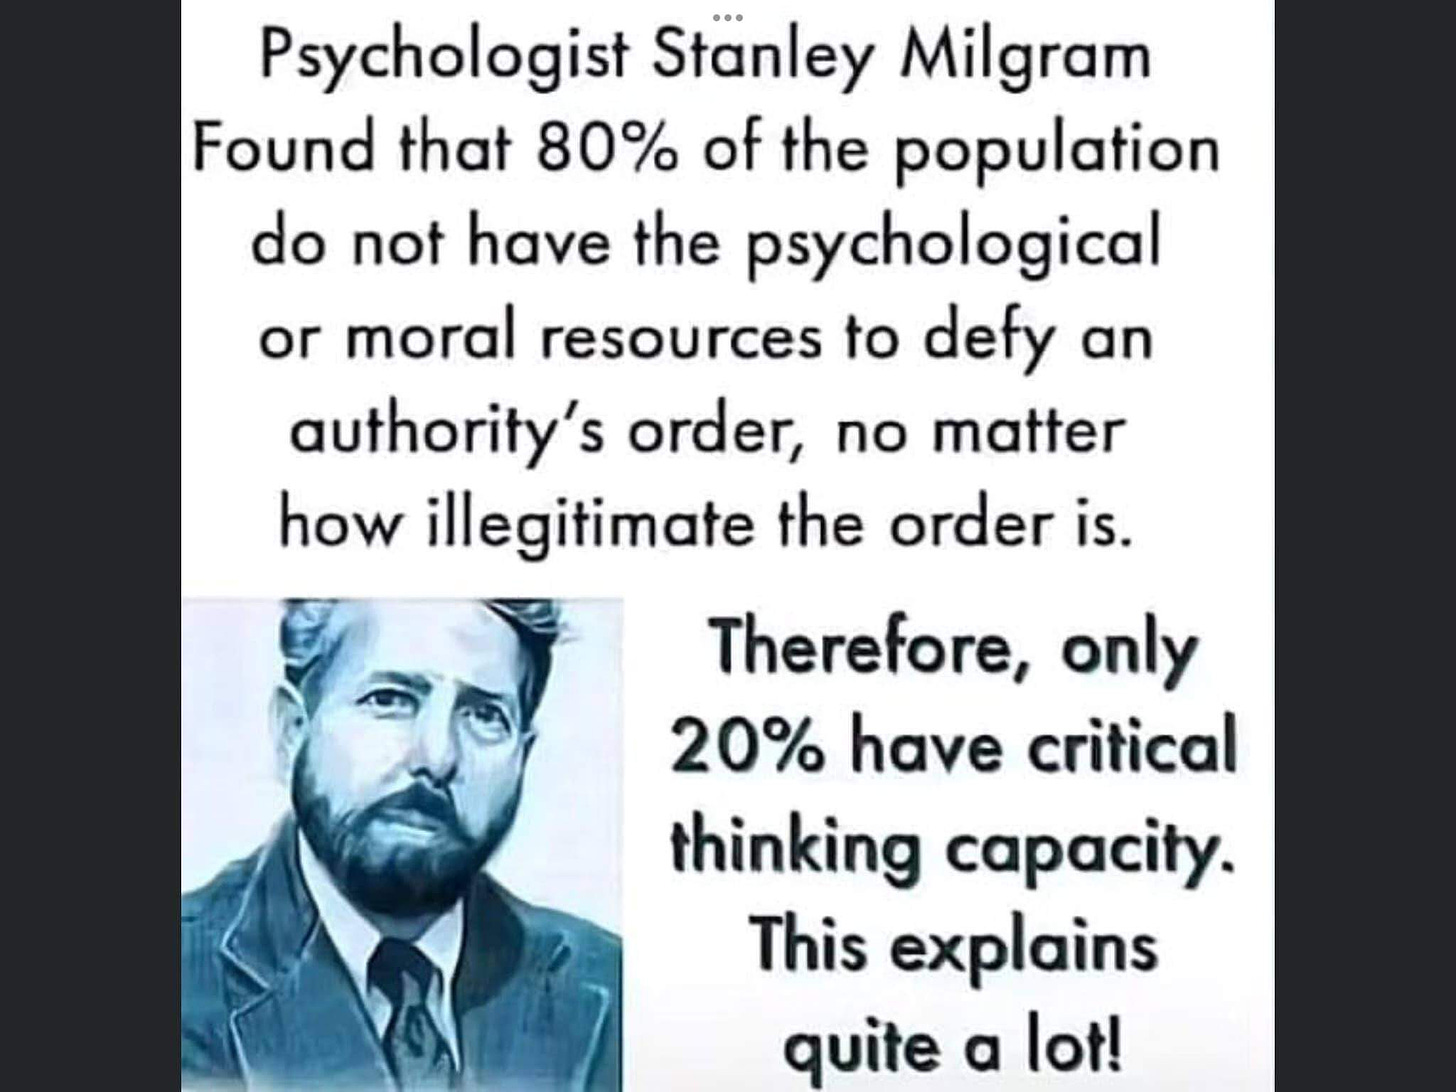 May be an image of 1 person and text that says "Psychologist Stanley Milgram Found that 80% of the population do not have the psychological or moral resources to defy an authority's order, no matter how illegitimate the order is. Therefore, only 20% have critical thinking capacity. This explains quite a lot!"